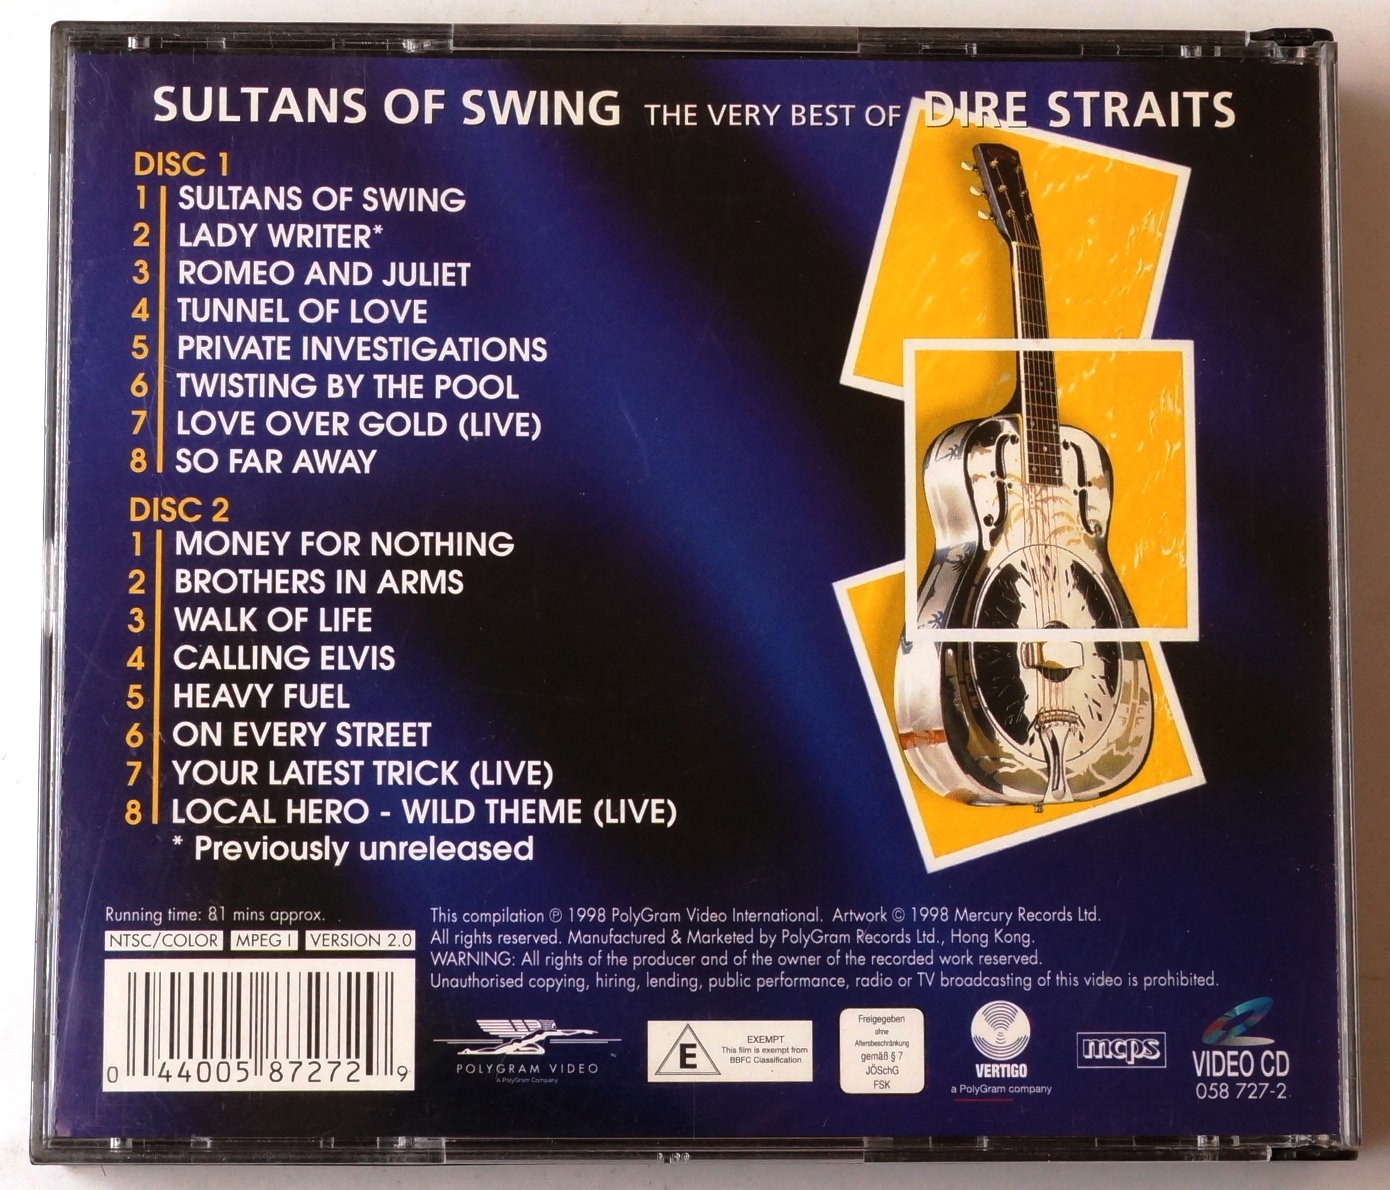 Sultans of Swing: The Very Best of Dire Straits by Dire Straits CD